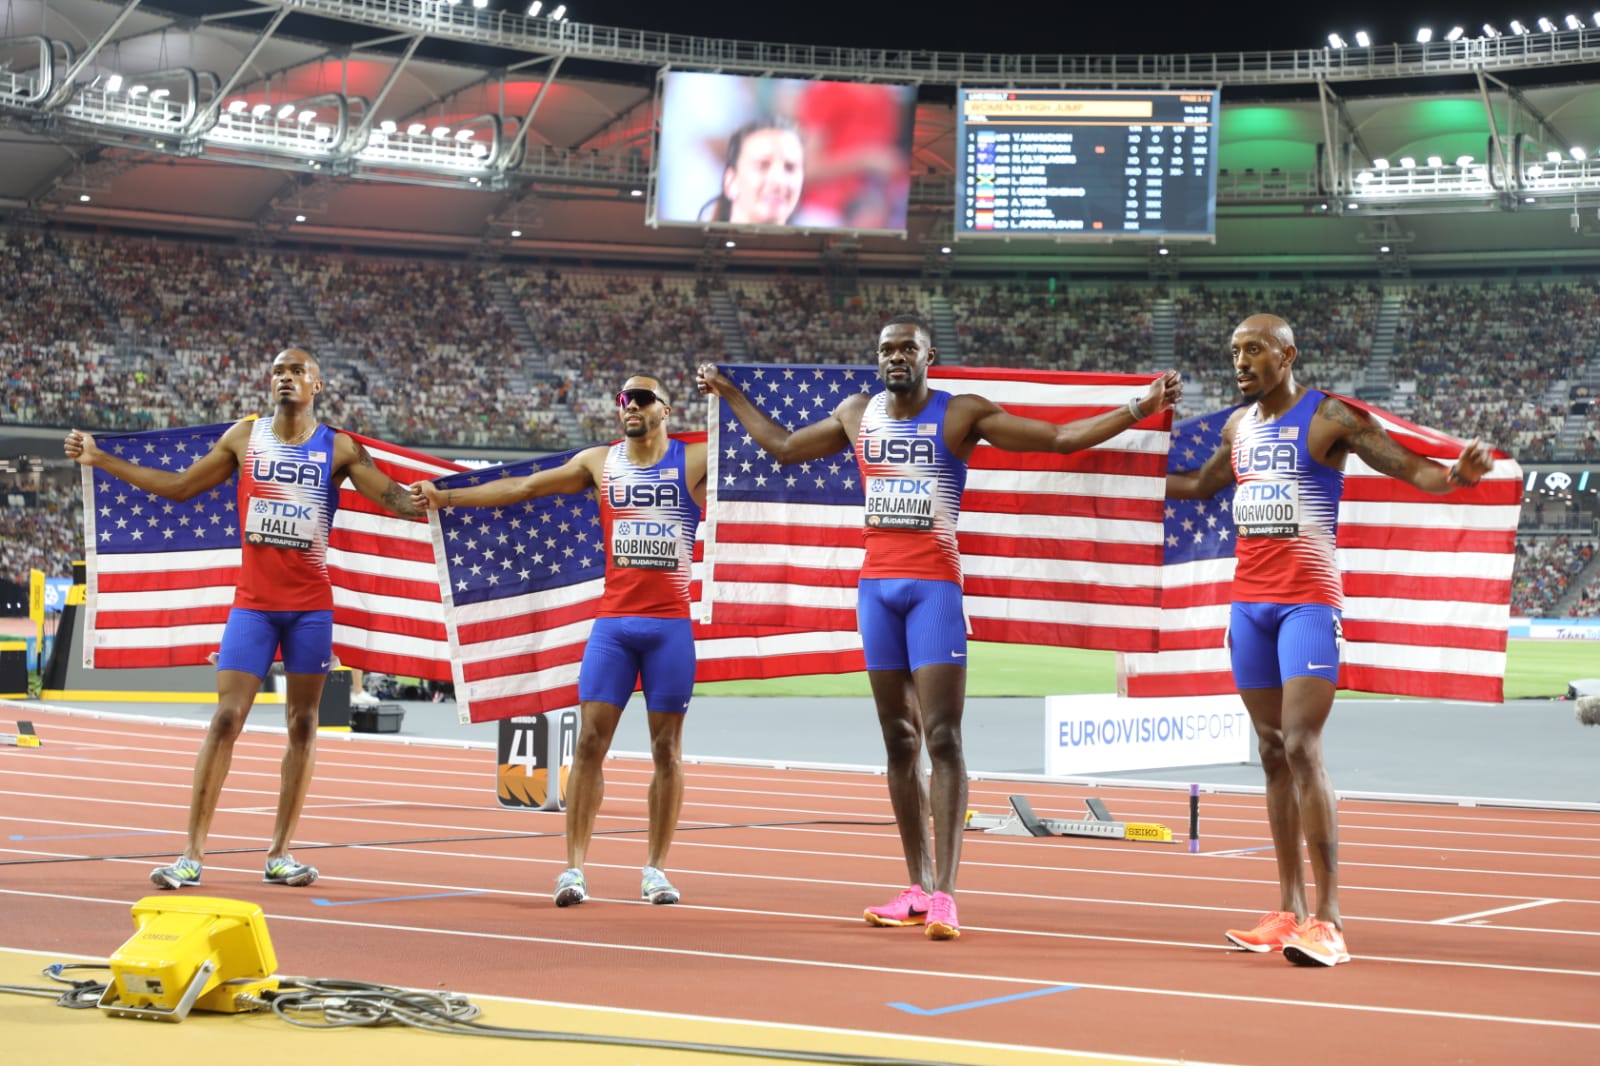 Quincy Hall, Vernon Norwood, Justin Robinson, and Rai Benjamin, in that sequence, ensured the USA's 4x400m World Championship streak remained unbroken at the Budapest 2023 World Athletics Championships